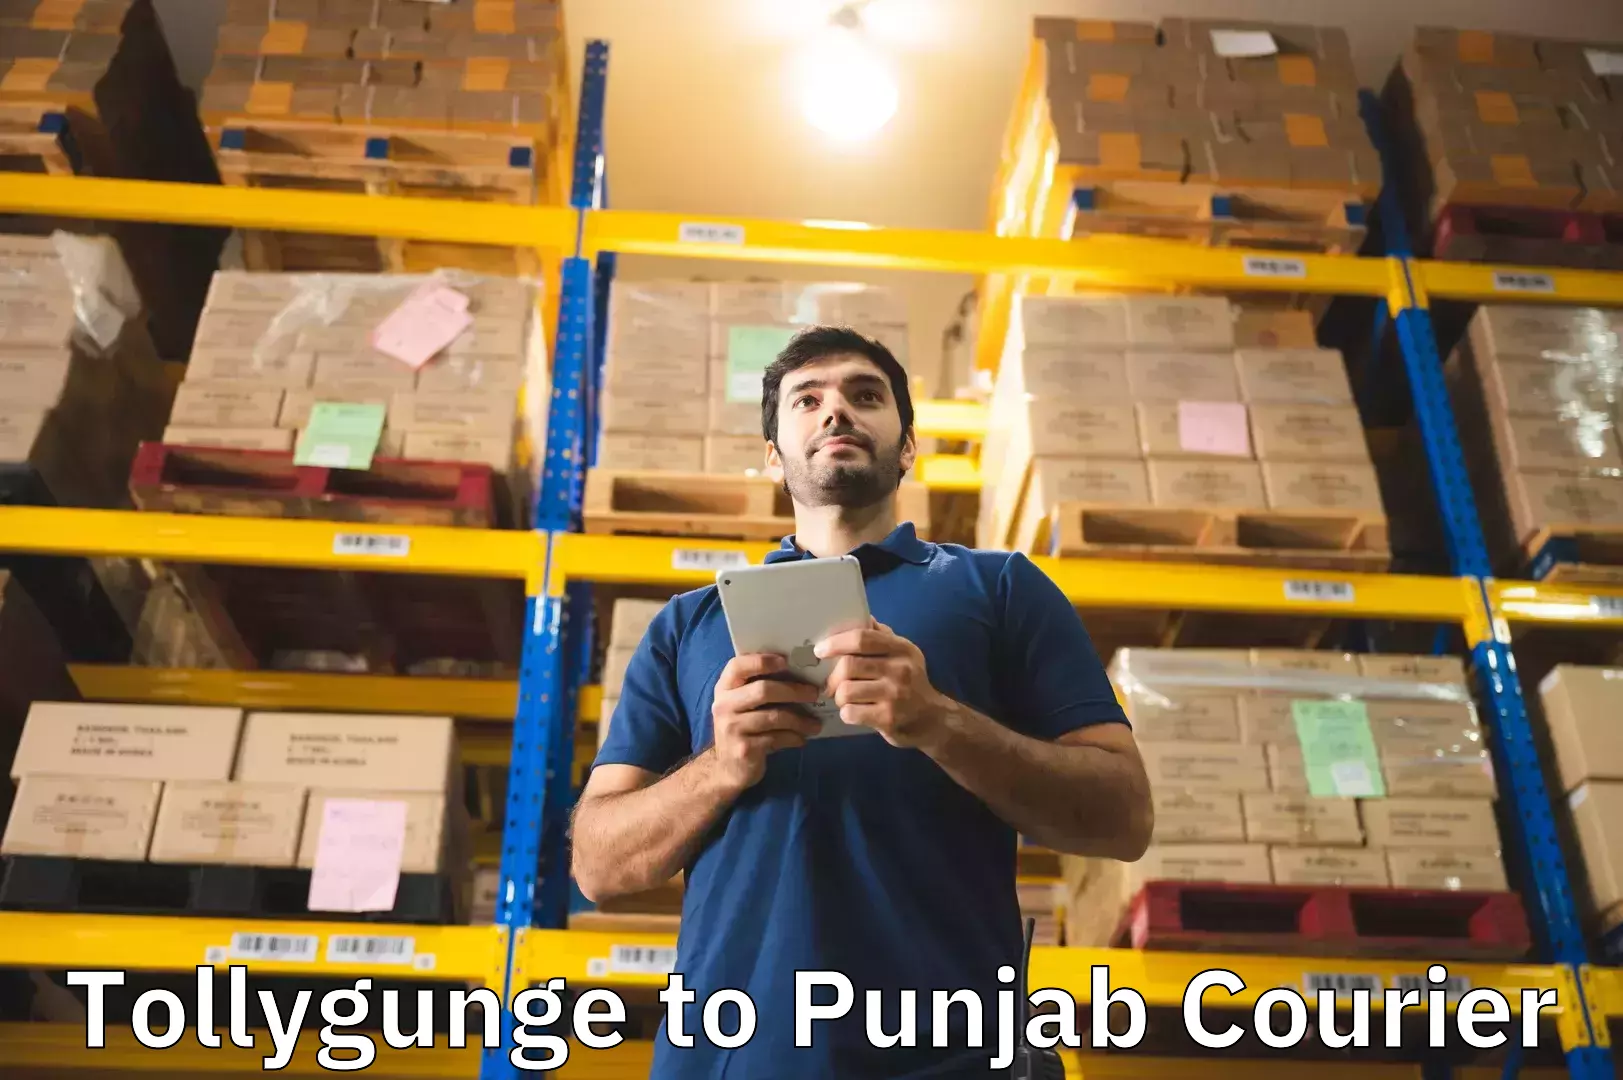 Luggage delivery system Tollygunge to Central University of Punjab Bathinda